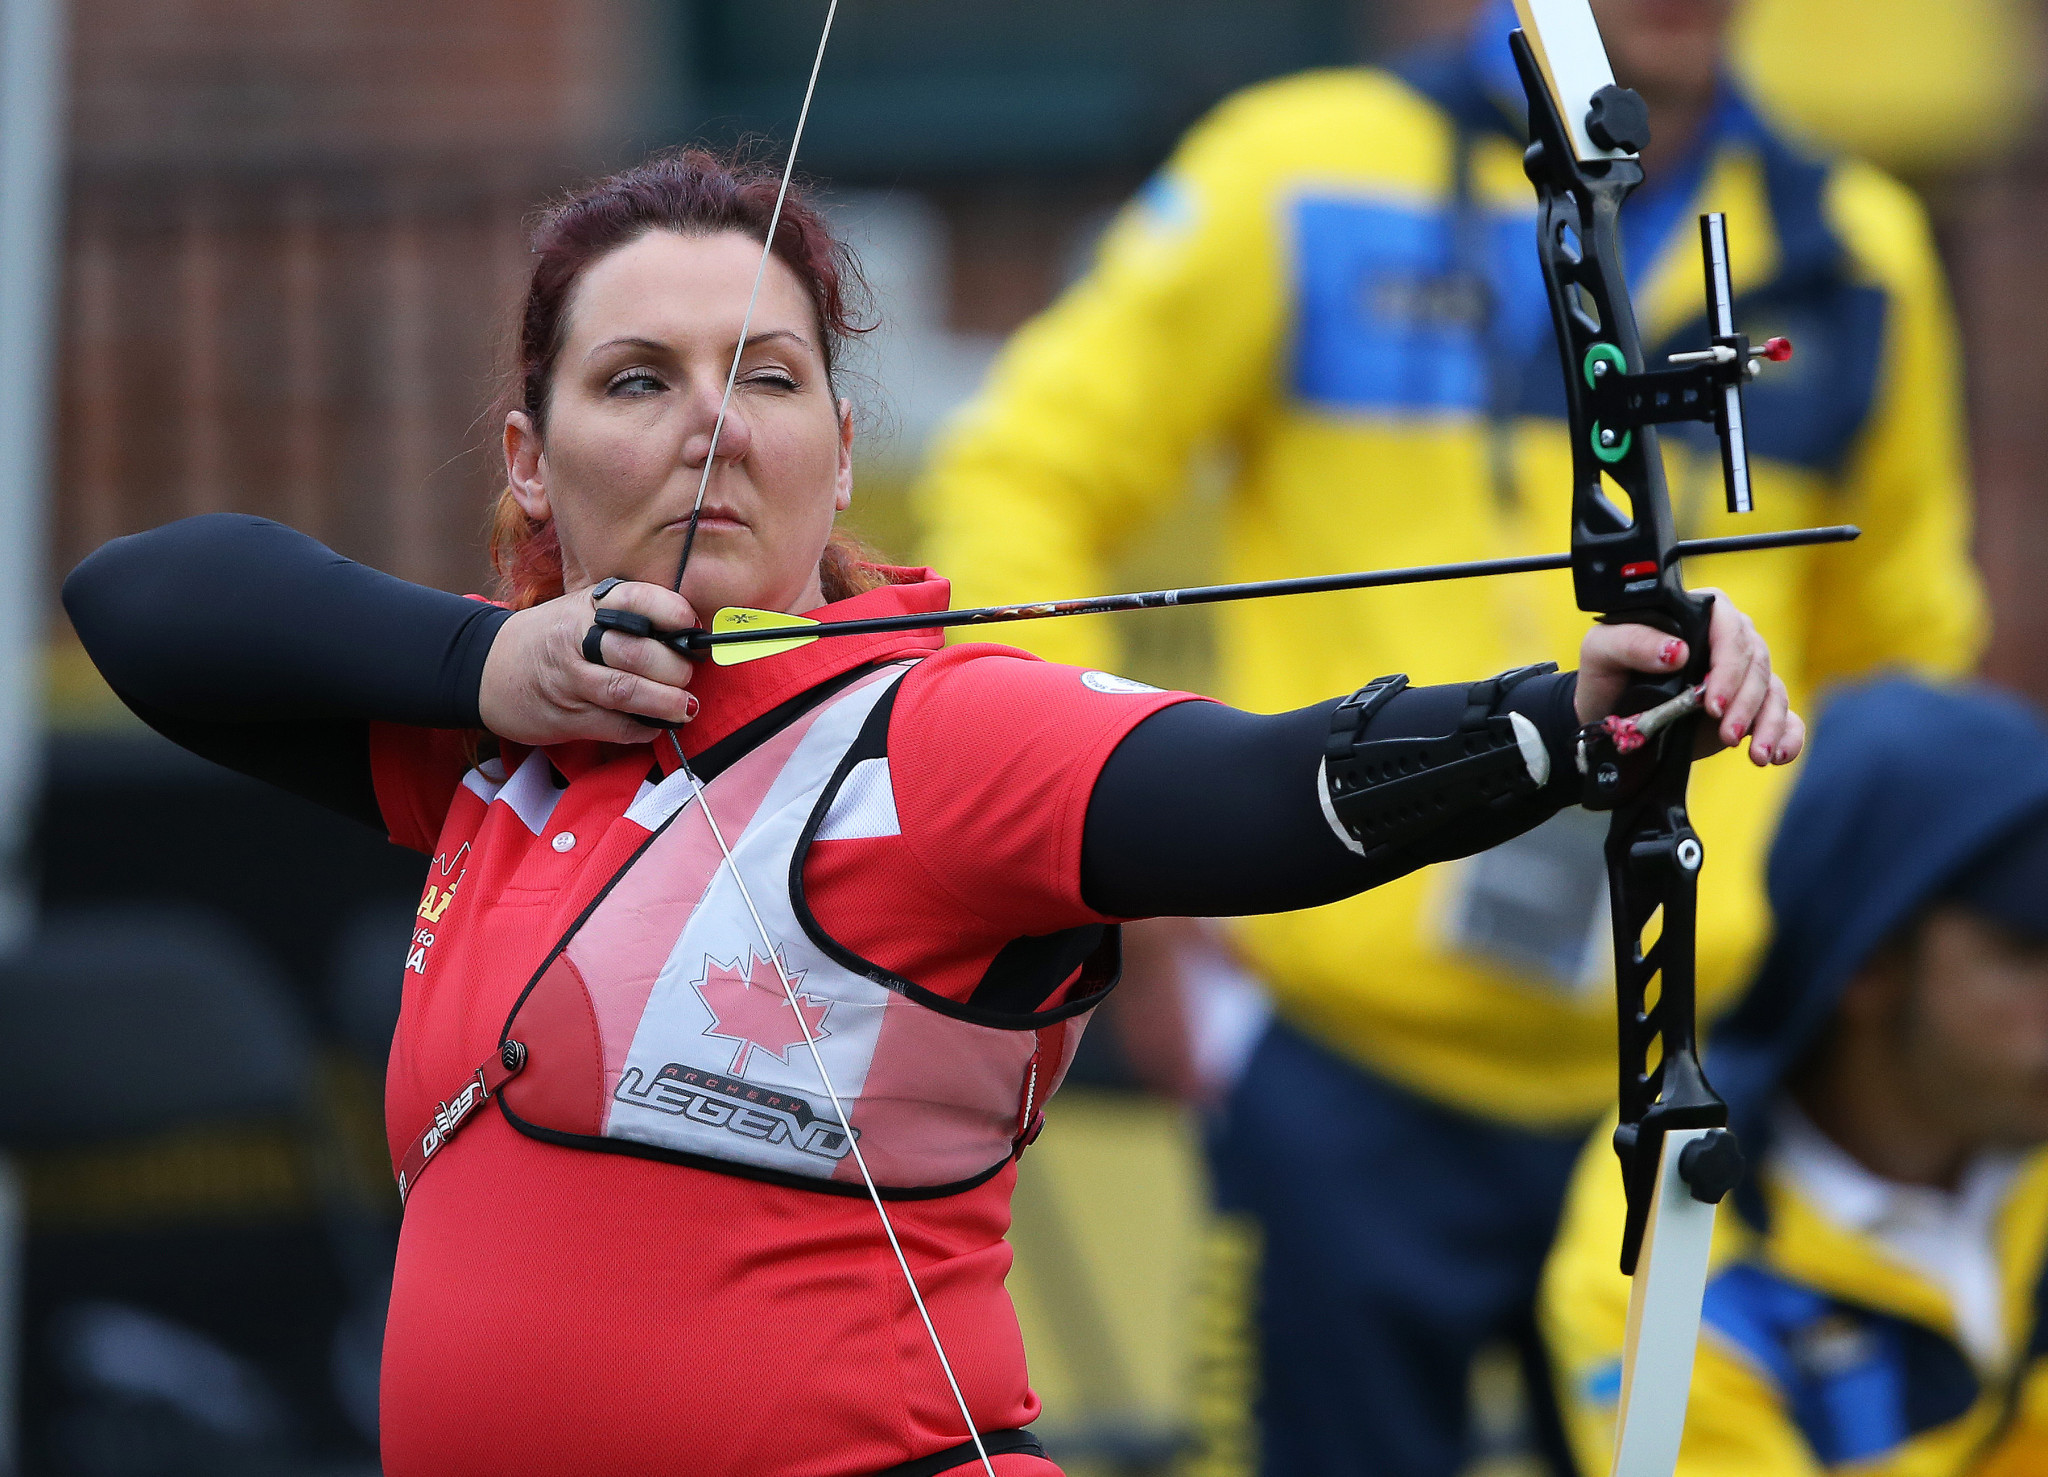 Elizabeth Newman claimed gold in the women's novice recurve final ©Getty Images